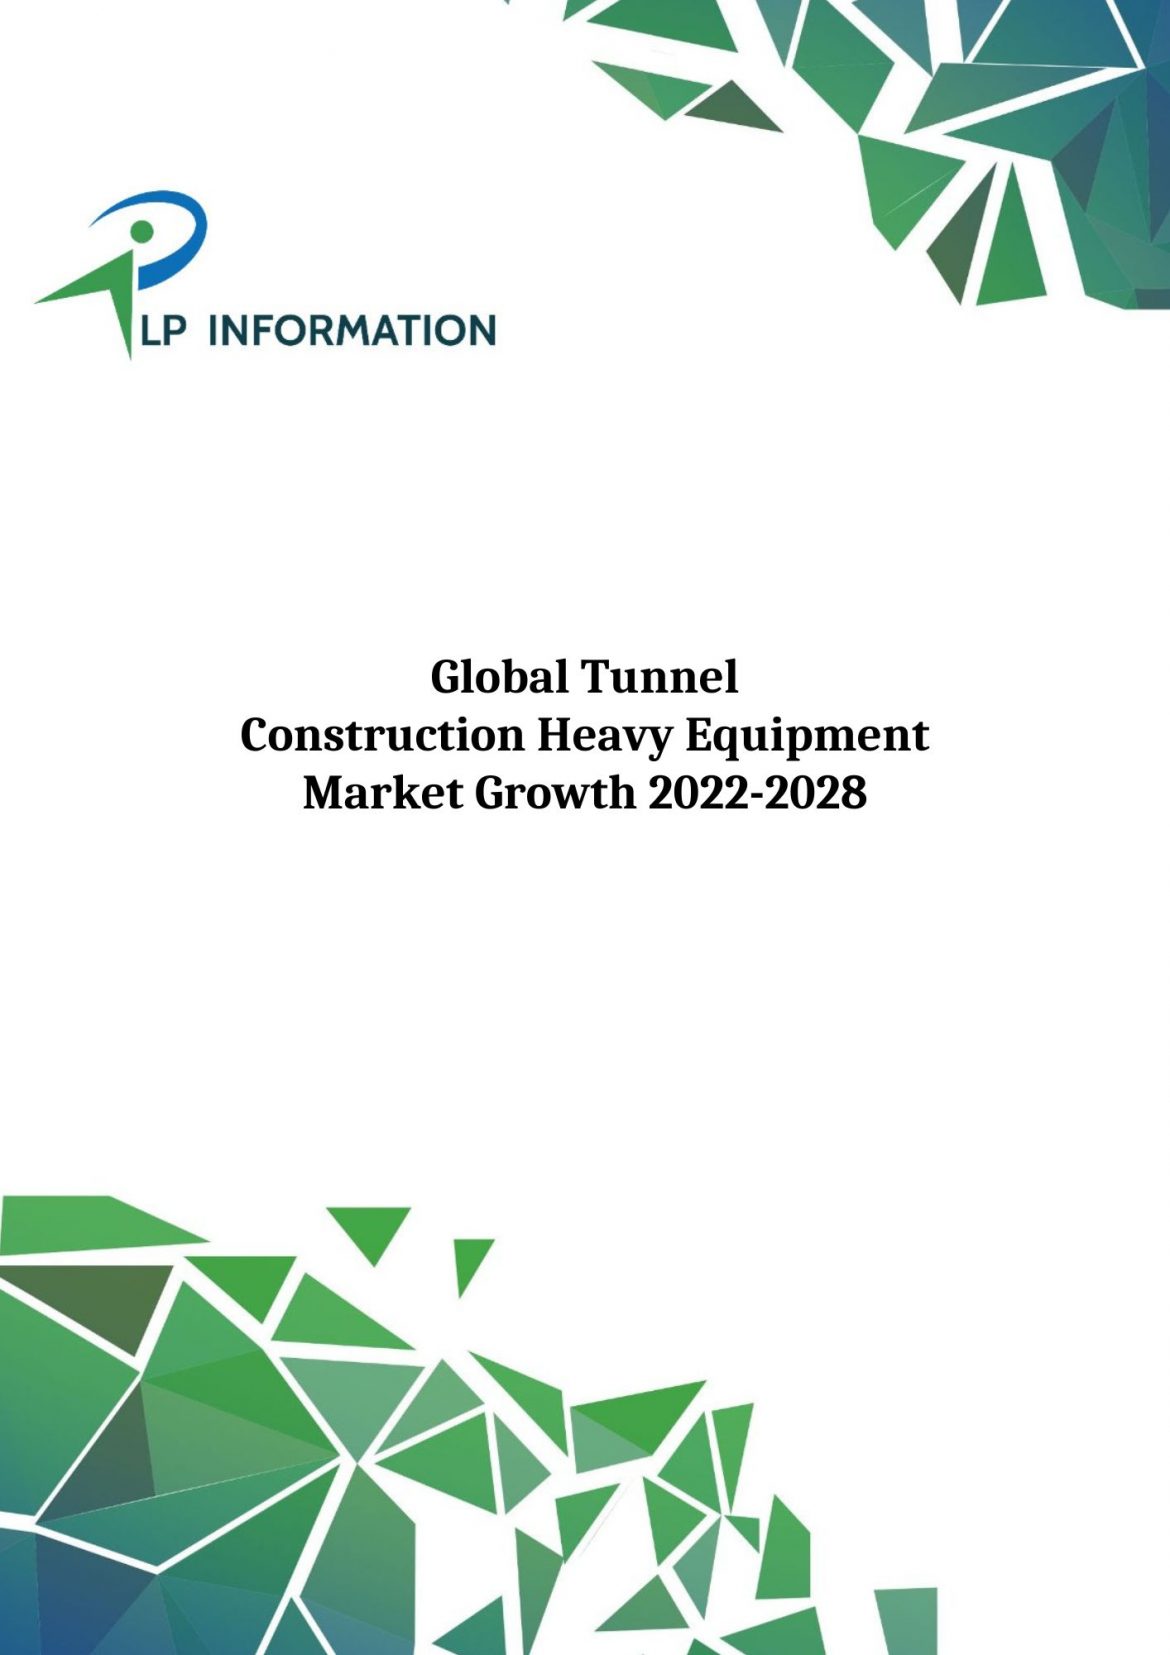 Global Tunnel Construction Heavy Equipment Market Growth 2022-2028